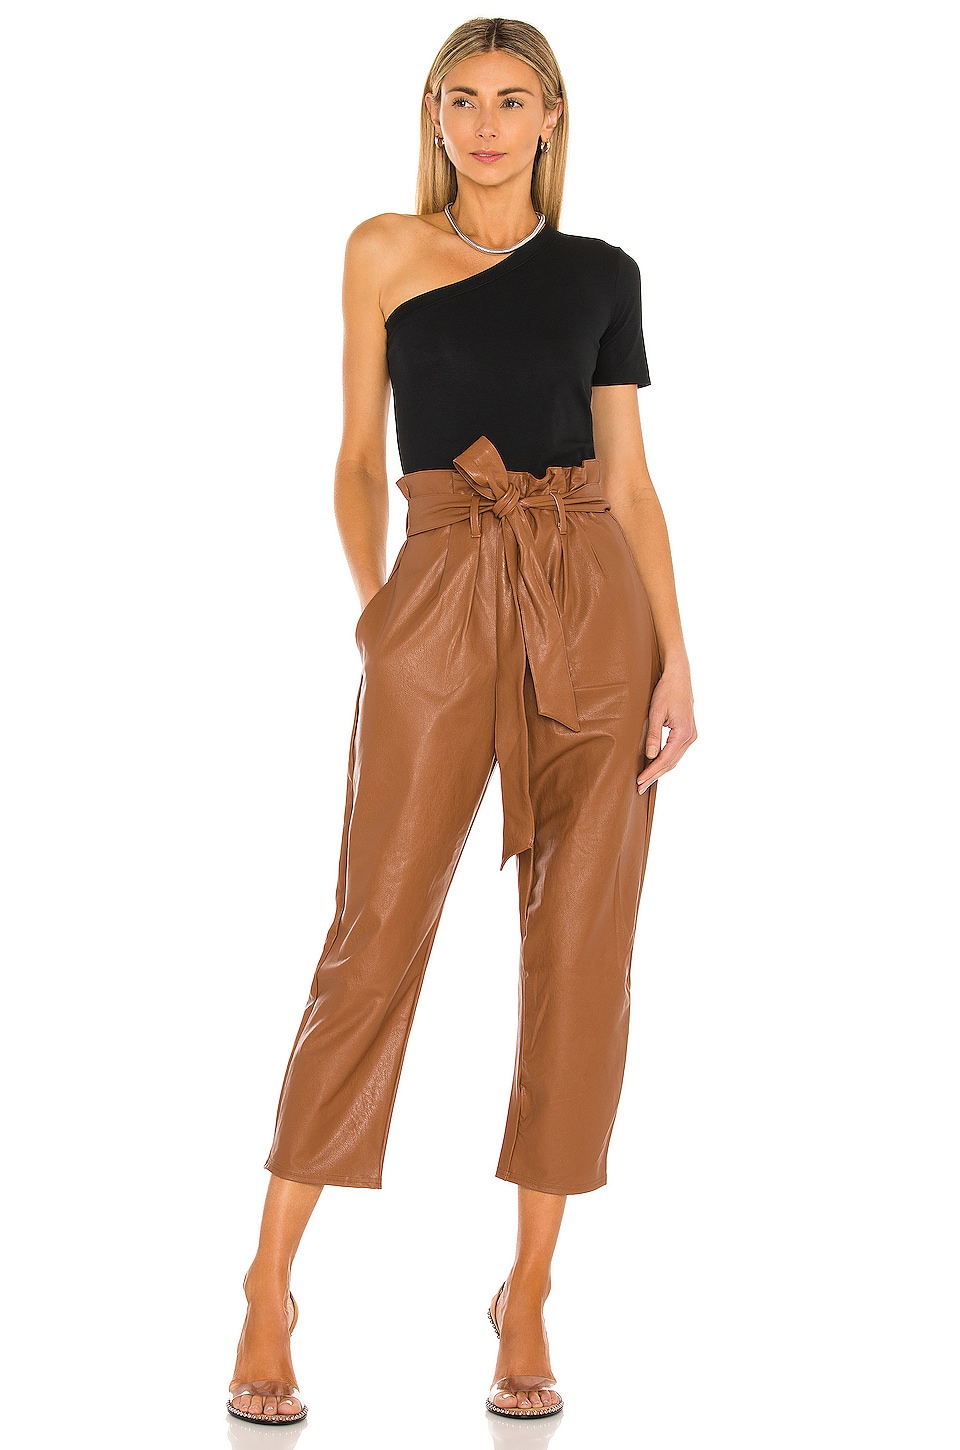 Commando Faux Leather Paperbag Pant in Cocoa | REVOLVE